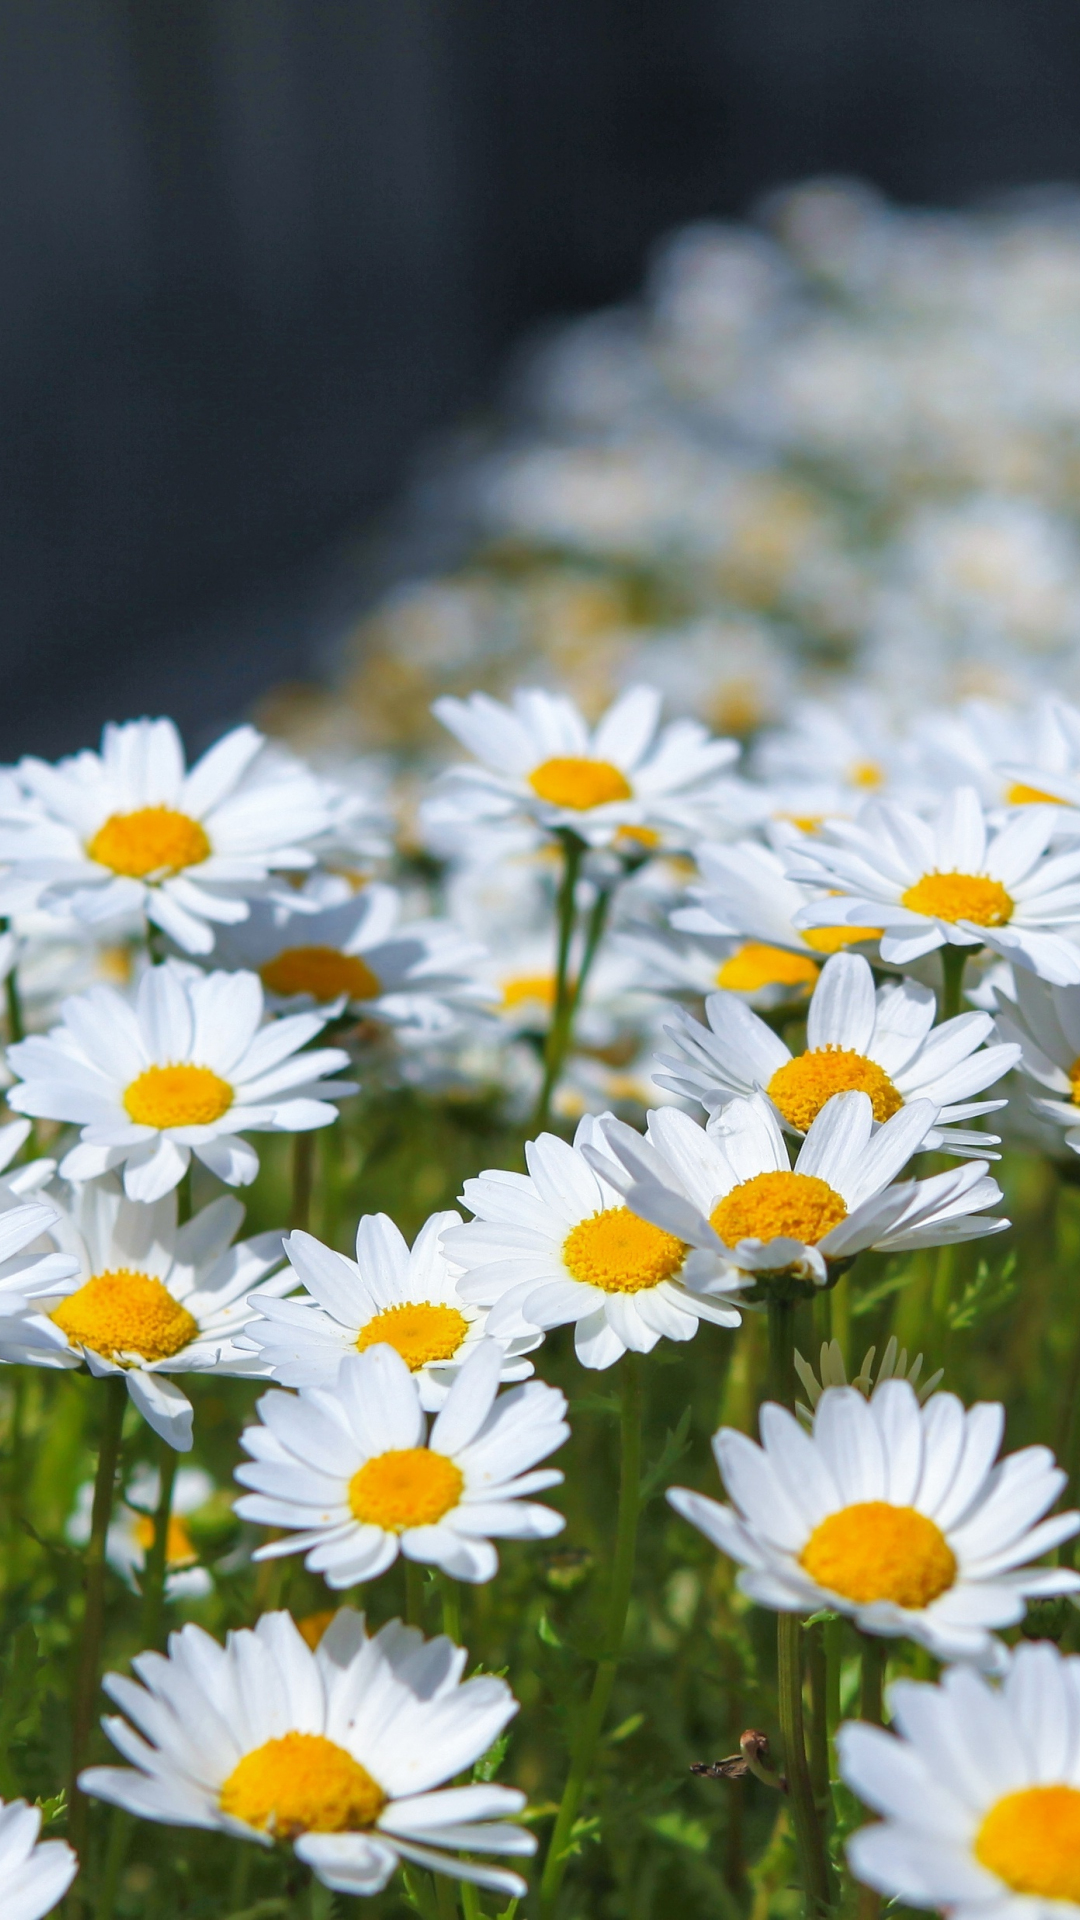 Meadow, spring, flowers, white daisy, 1080x1920 wallpaper